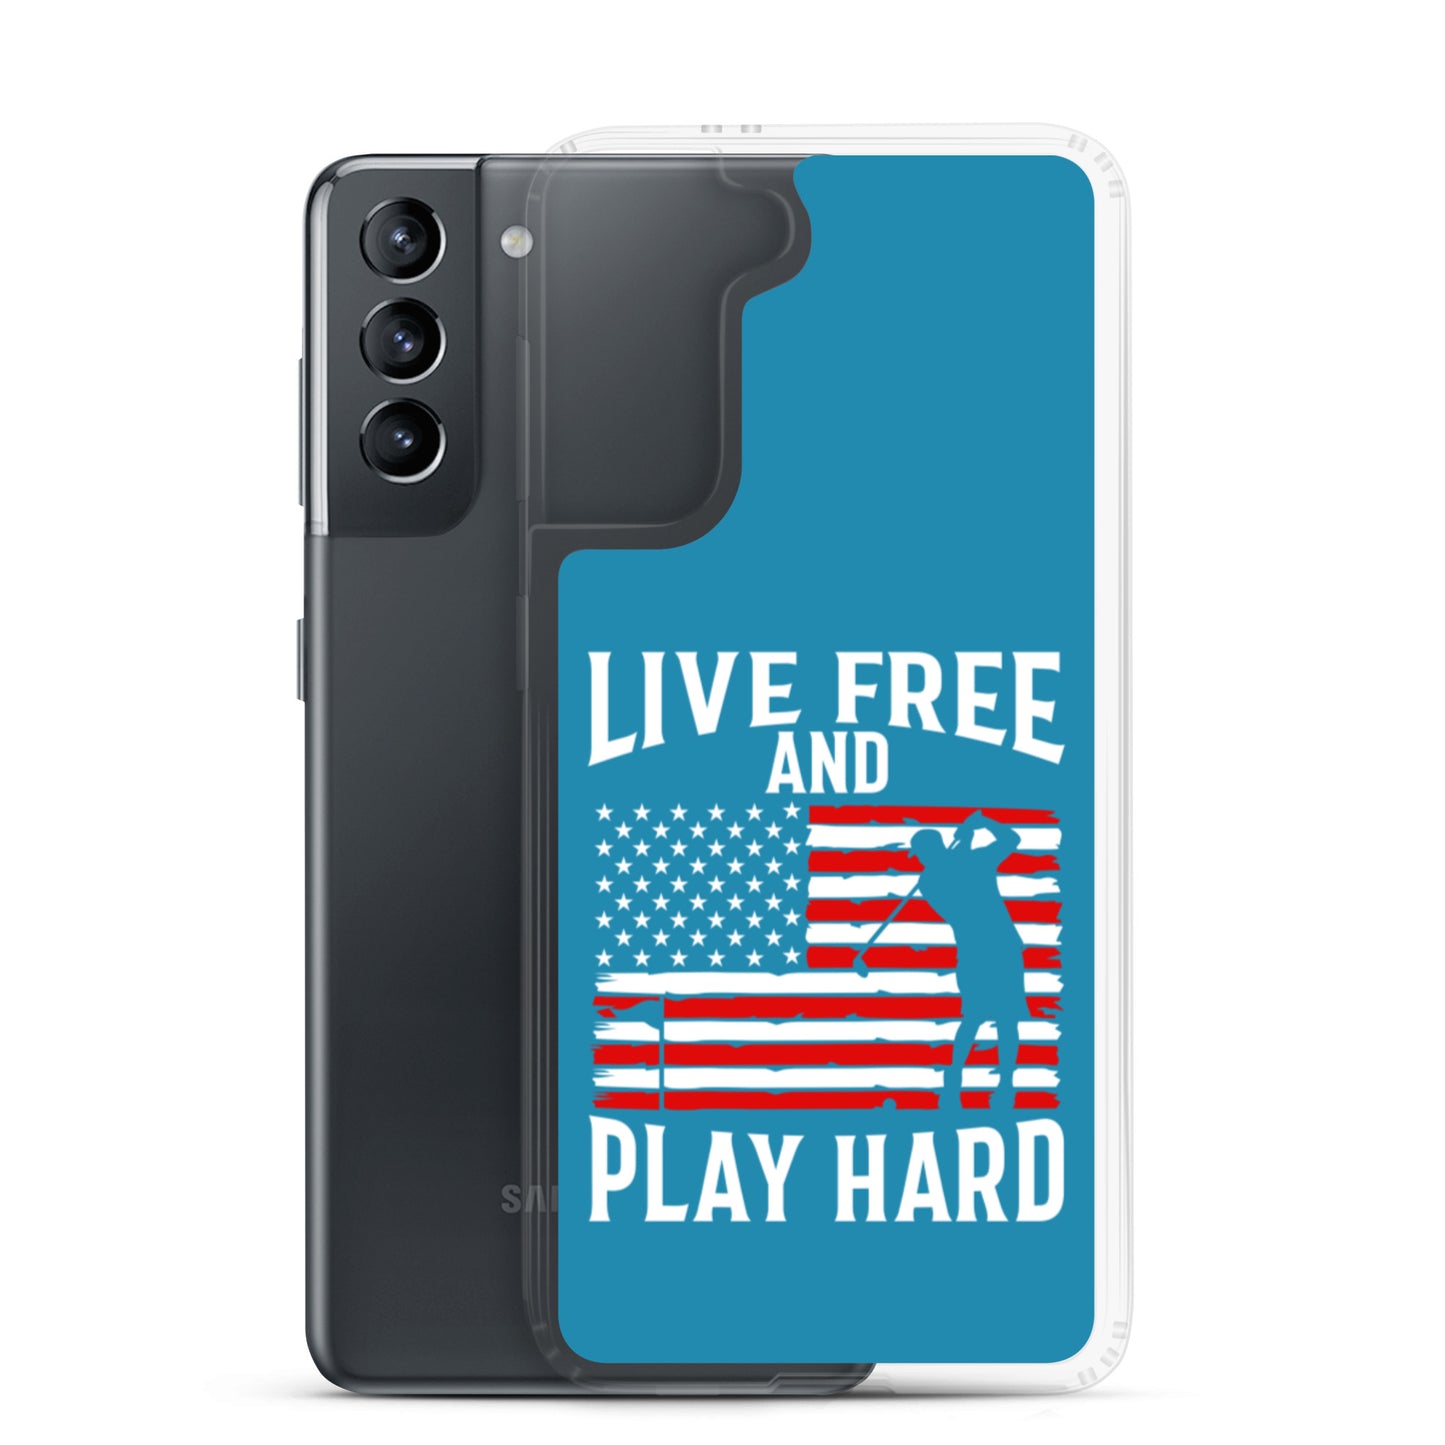 Live Free and Play Hard Samsung Case